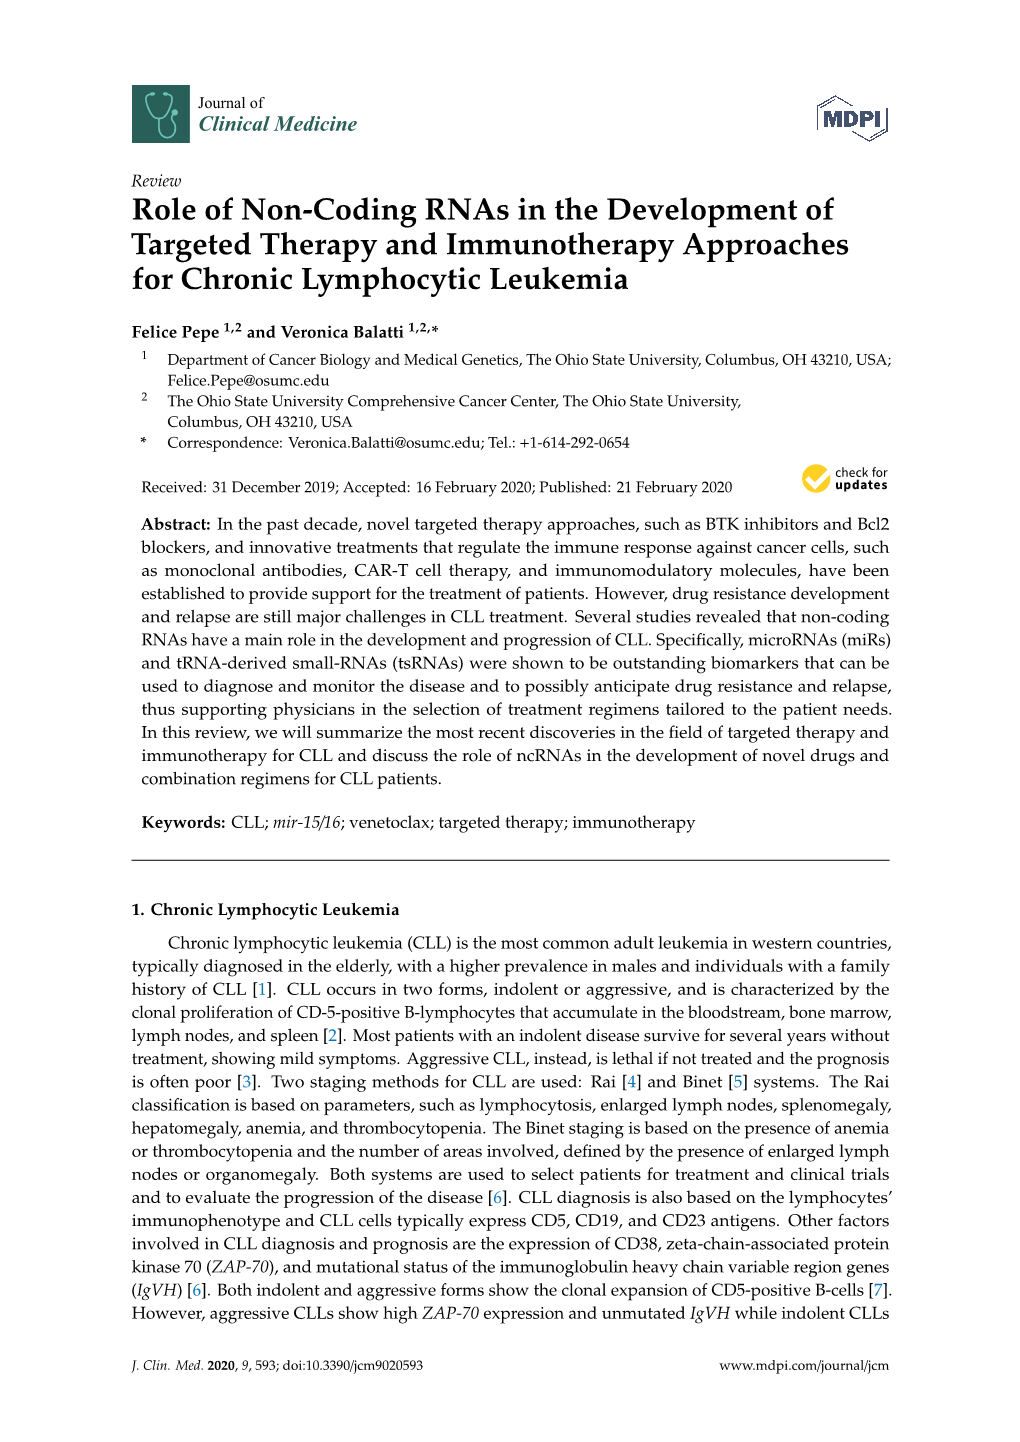 Role of Non-Coding Rnas in the Development of Targeted Therapy and Immunotherapy Approaches for Chronic Lymphocytic Leukemia